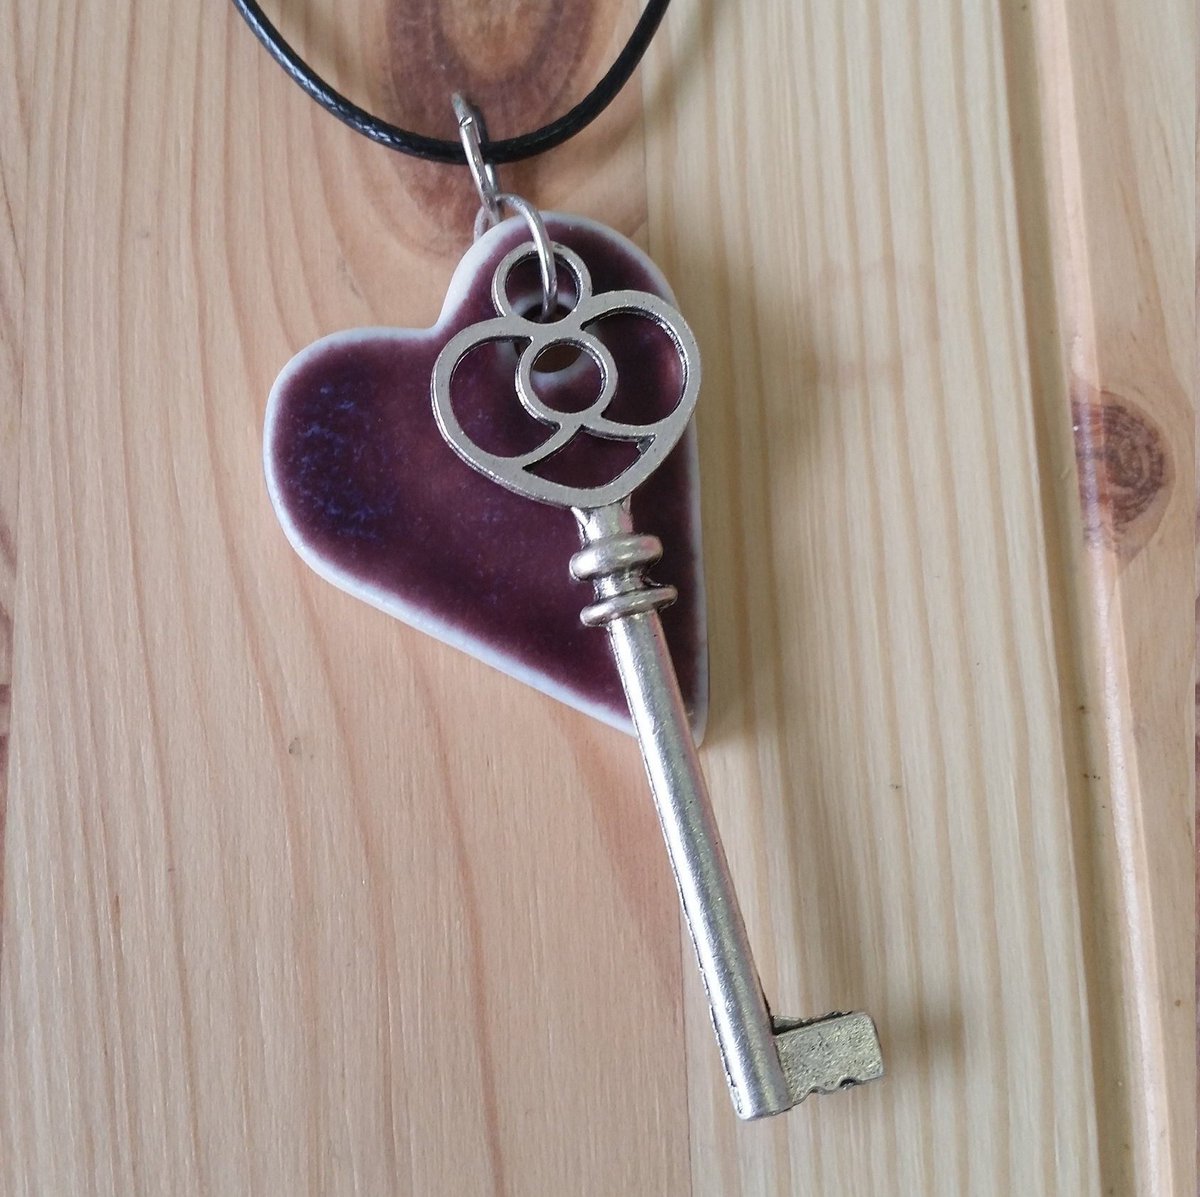 Simply beautiful heart pendant necklace. Each is OOAK and lovingly handcrafted in the Mud Bakery. Strawberry pink and Grape purple pendants available, and optional key charm to give it that extra bit of shine for your Valentine. #etsy #buyhandmade #ceramicjewelry